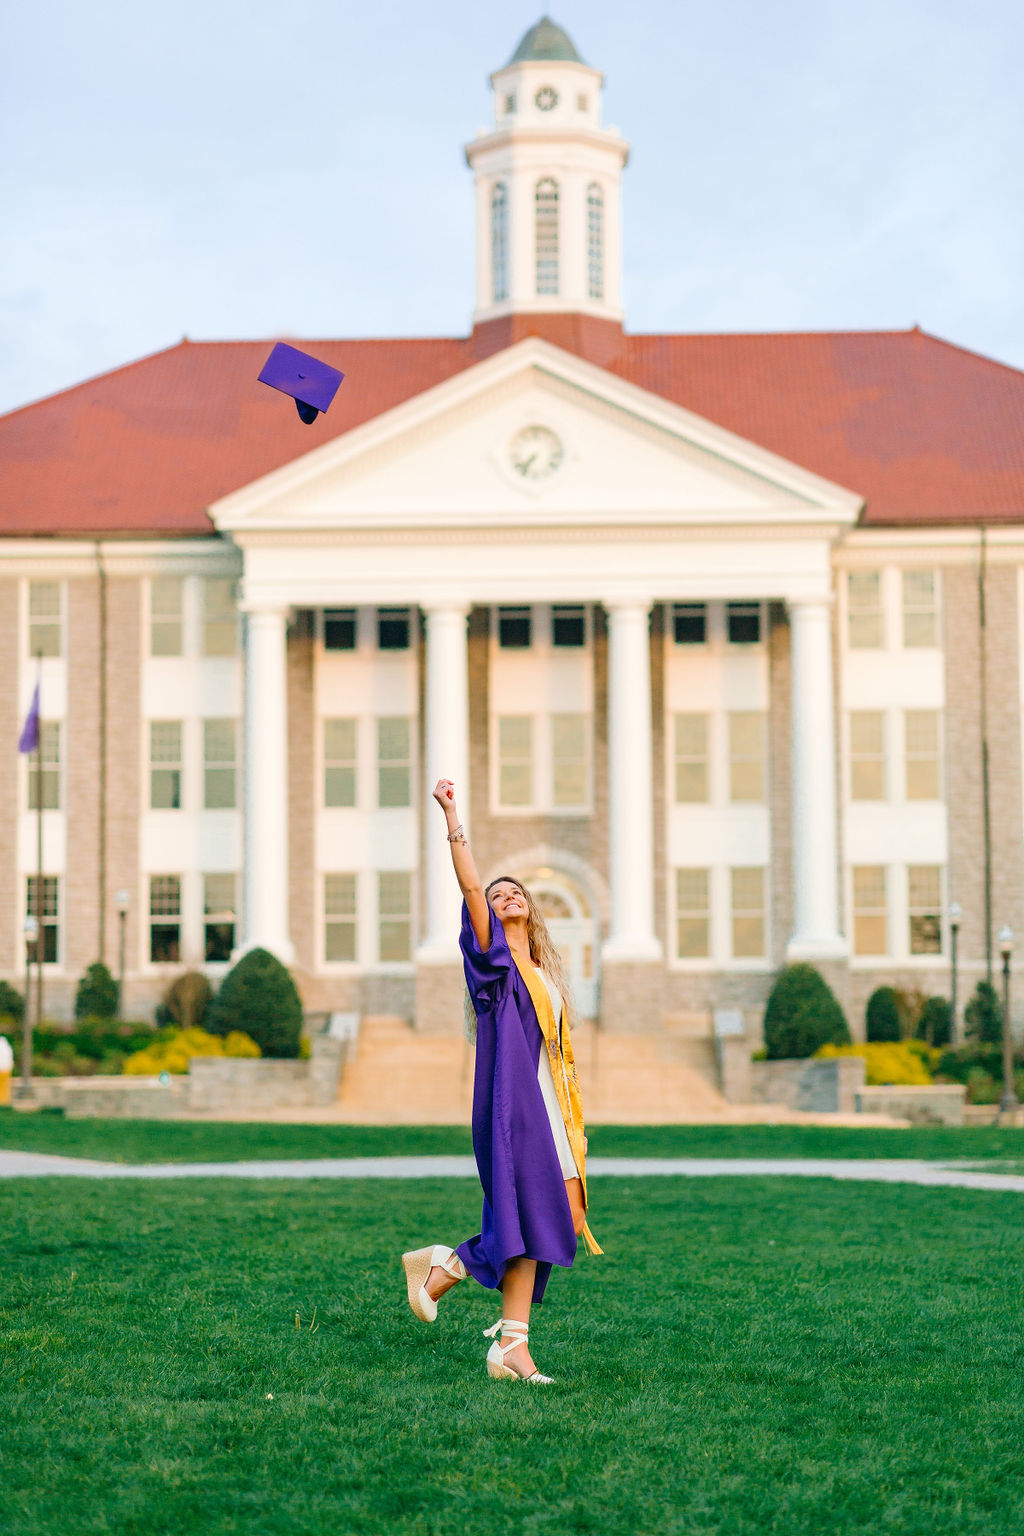 A college grad in a white dress and purple gown tosses her cap in the air while standing in a lawn thanks to jmu tutoring